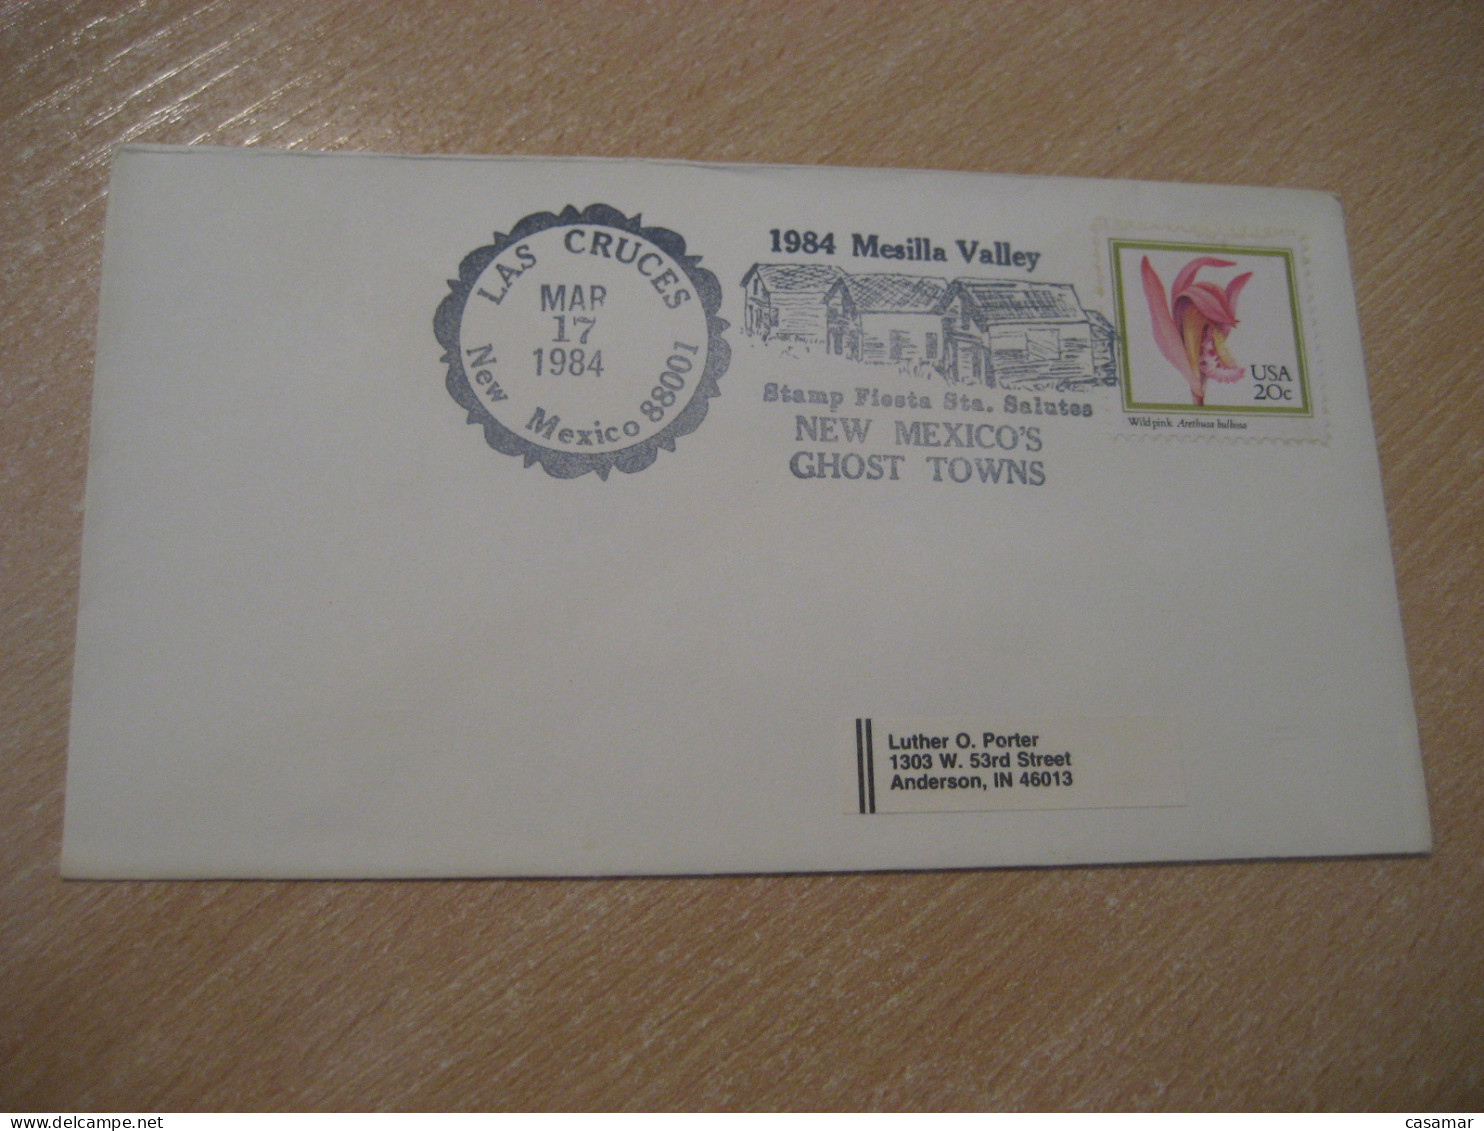 LAS CRUCES 1984 Mesilla Valley New Mexico Ghost Towns American Indians Indian Cancel Cover USA Indigenous Native History - American Indians